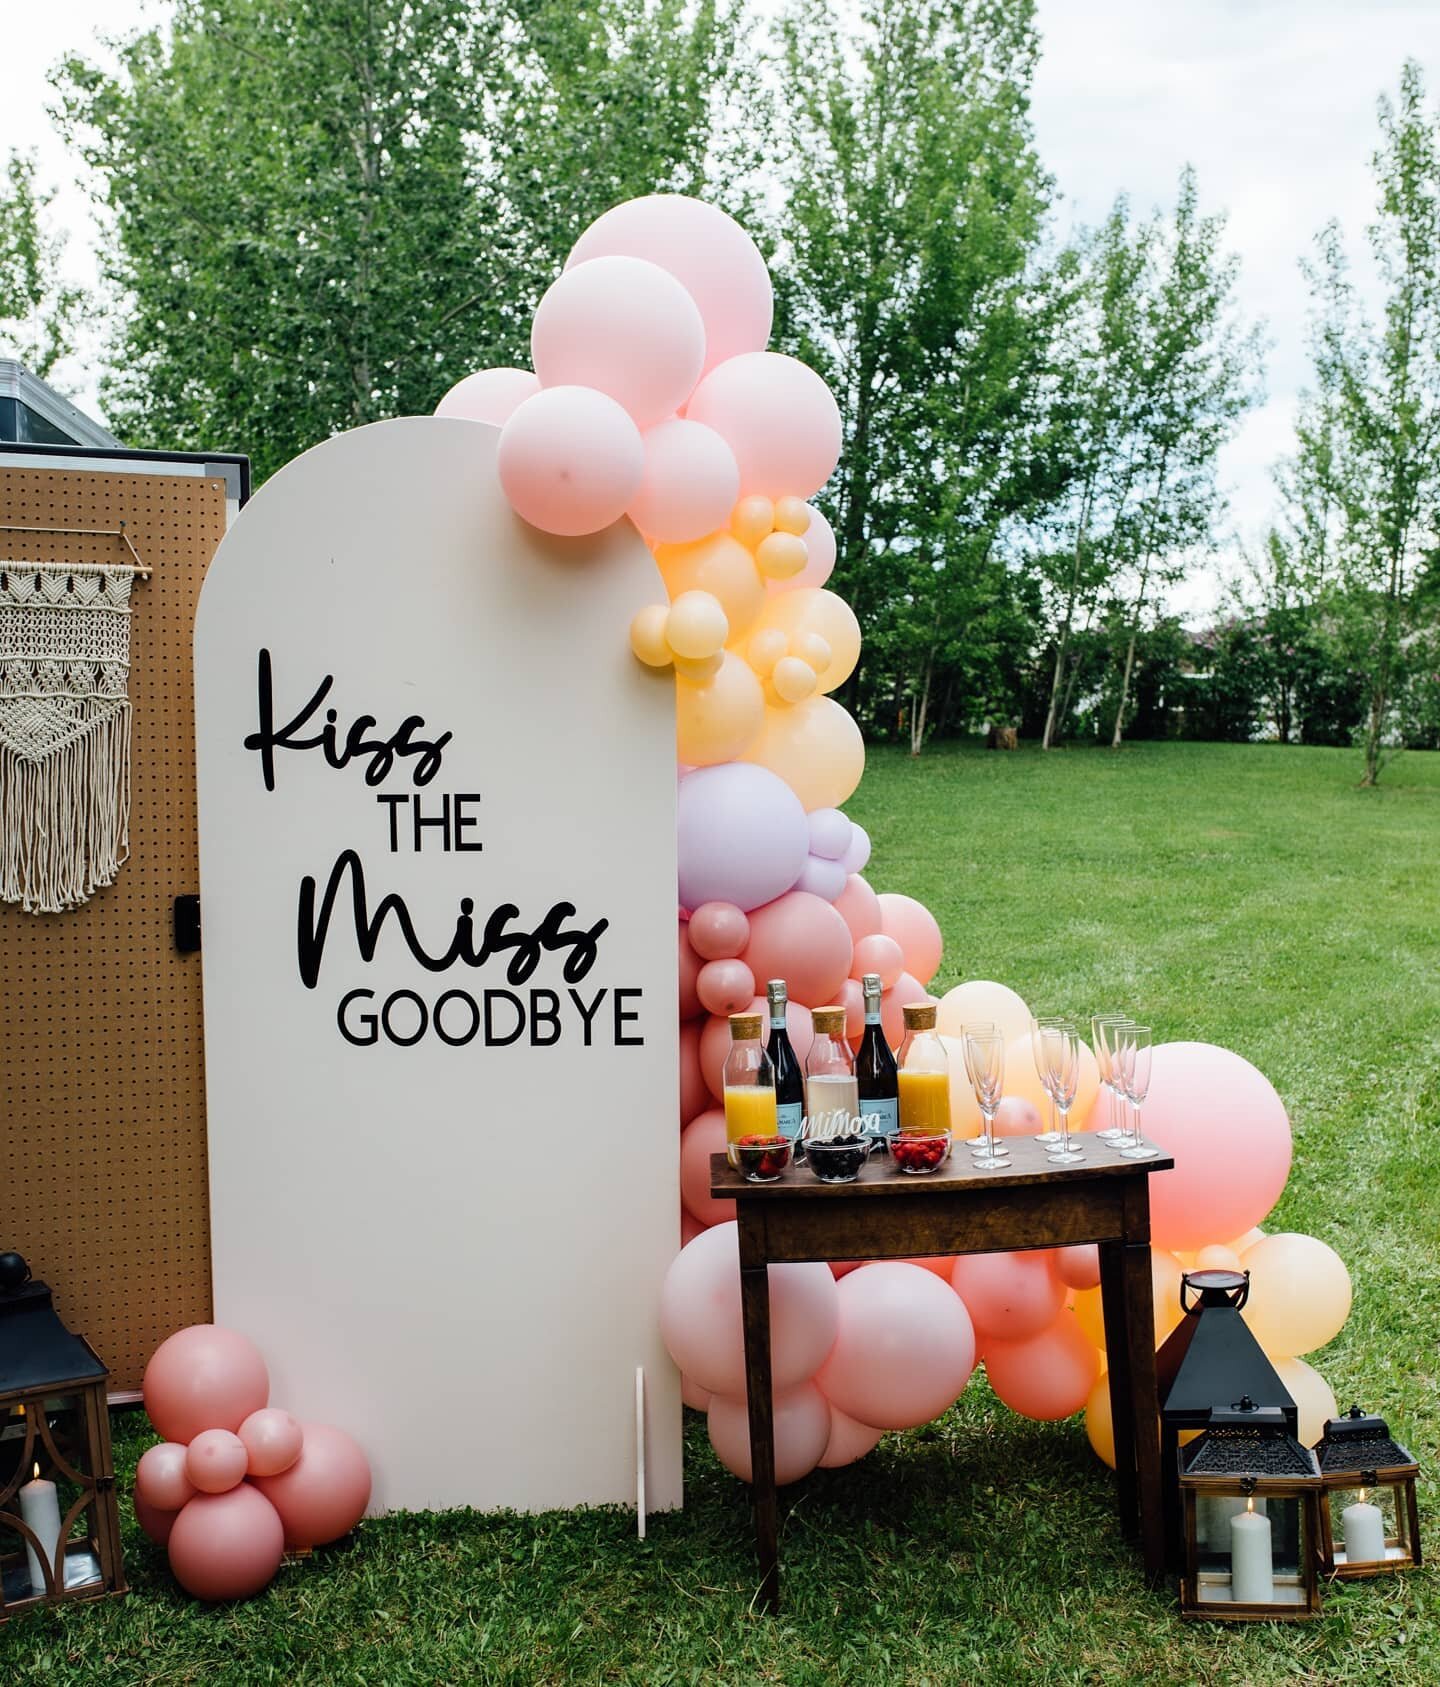 What's a must have for your bridal shower? My vote is always on Margaritas.

Reach out for a quote for your next event and let us create something magical!

Event styling @stylingmemories_bypaulgresos 
Photography @pineandpeakphoto 
Mobile Bar @scotc